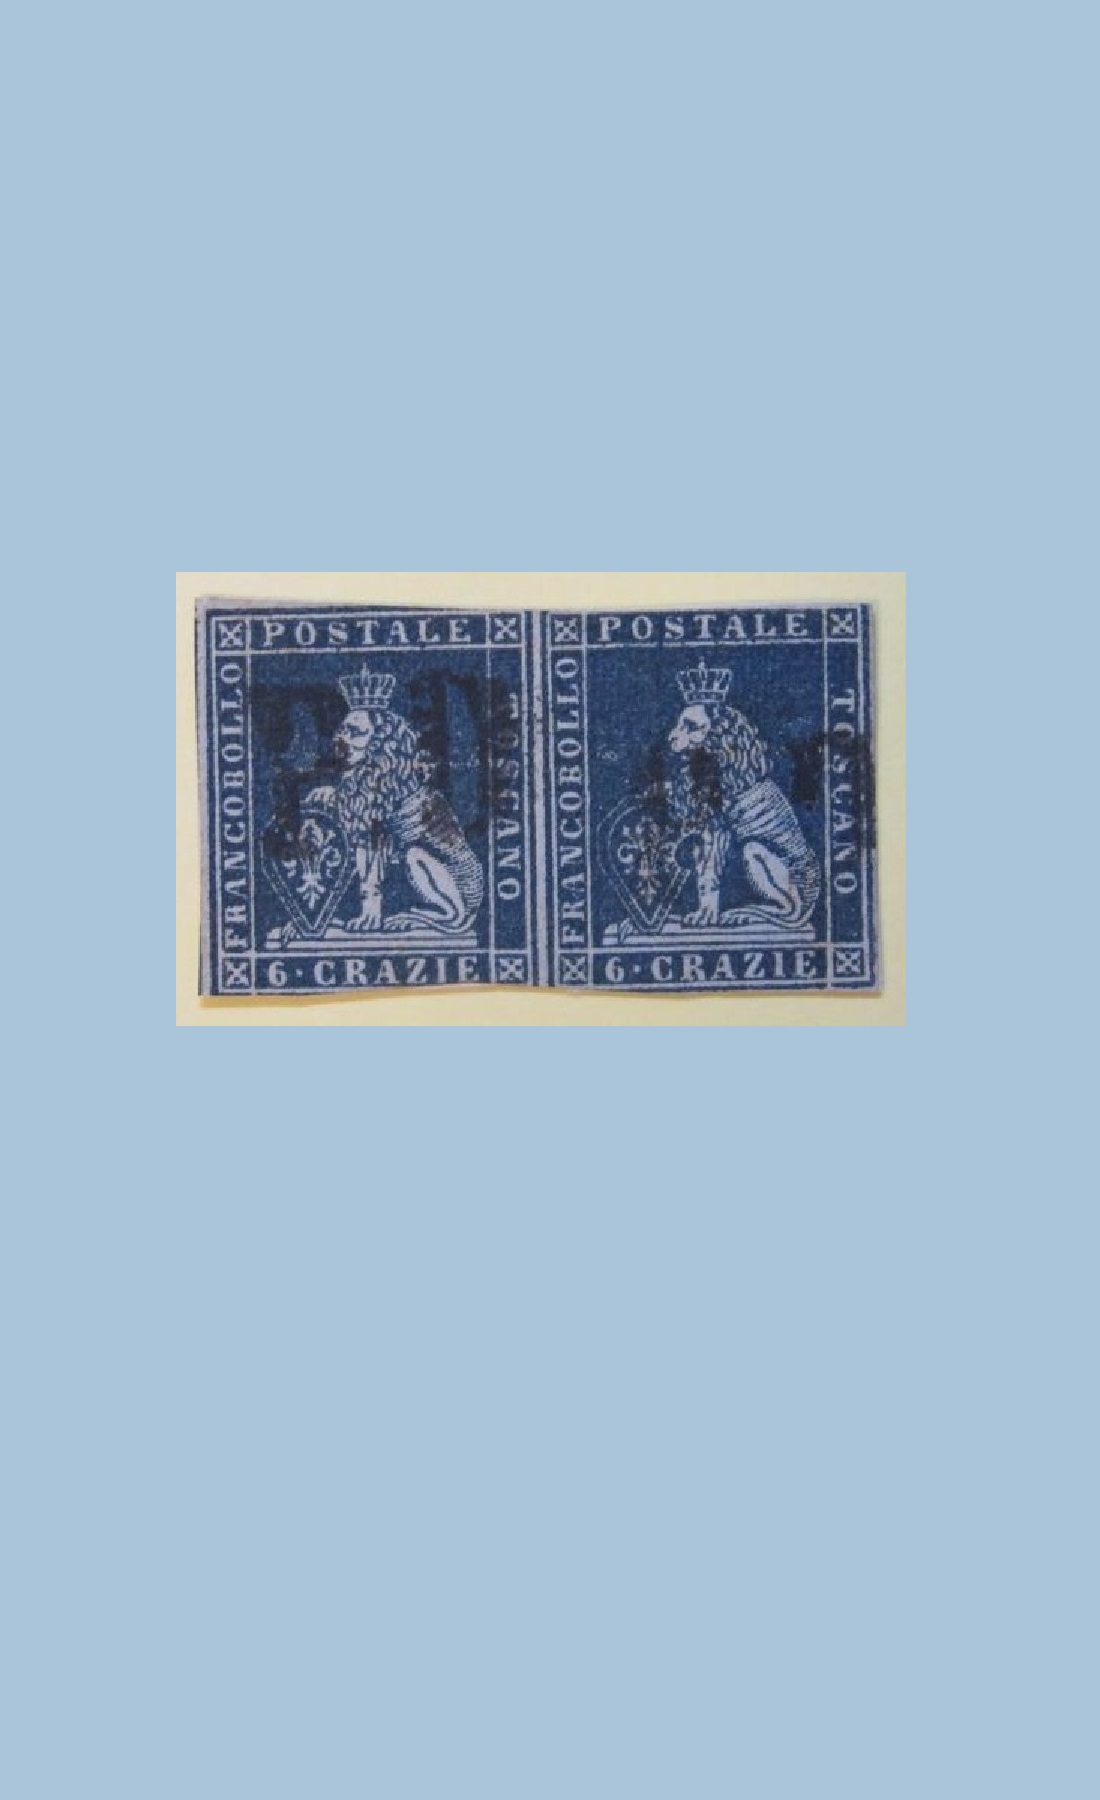 The Original Pair of Postage Stamps 1851 | Tuscany Lion 